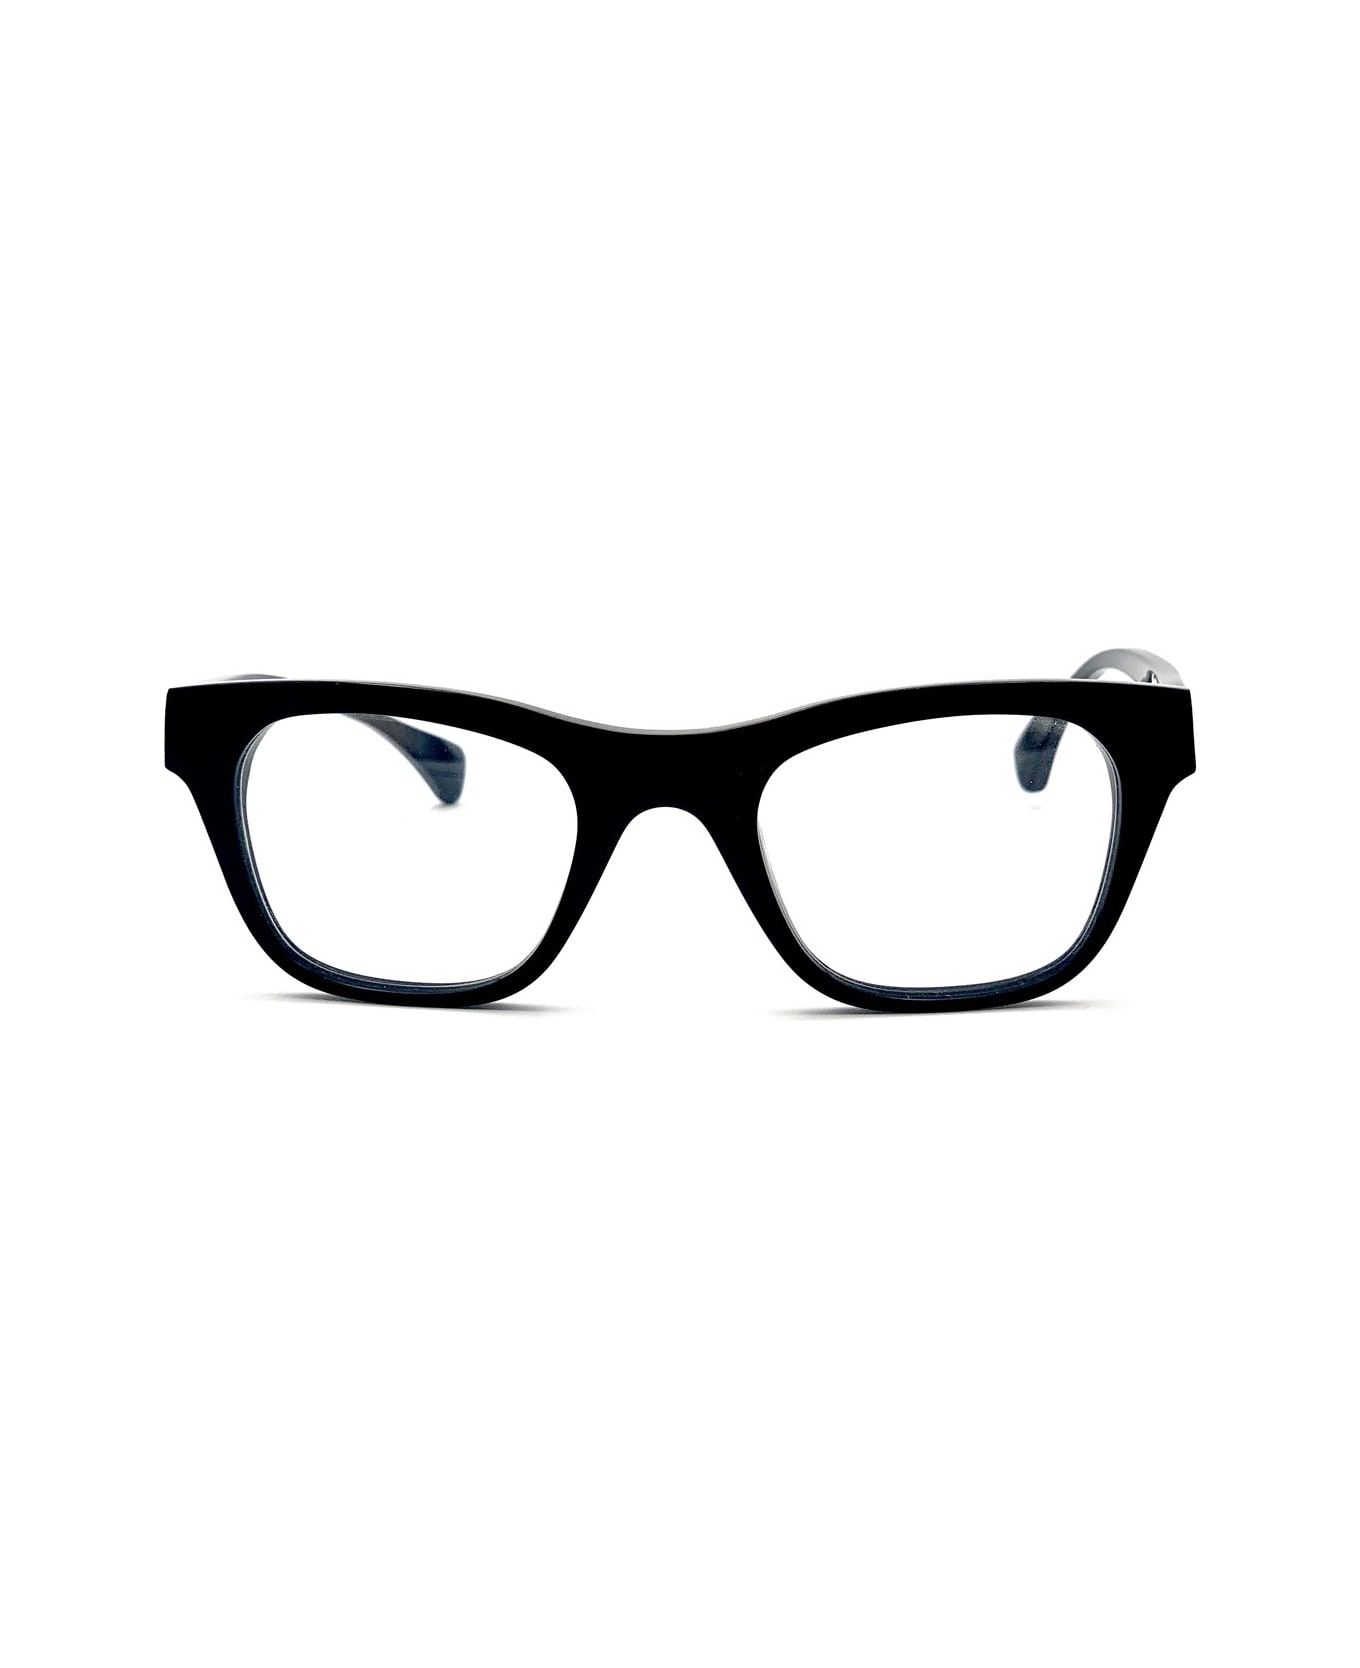 Jacques Durand Madere Xl 101 Glasses - Nero